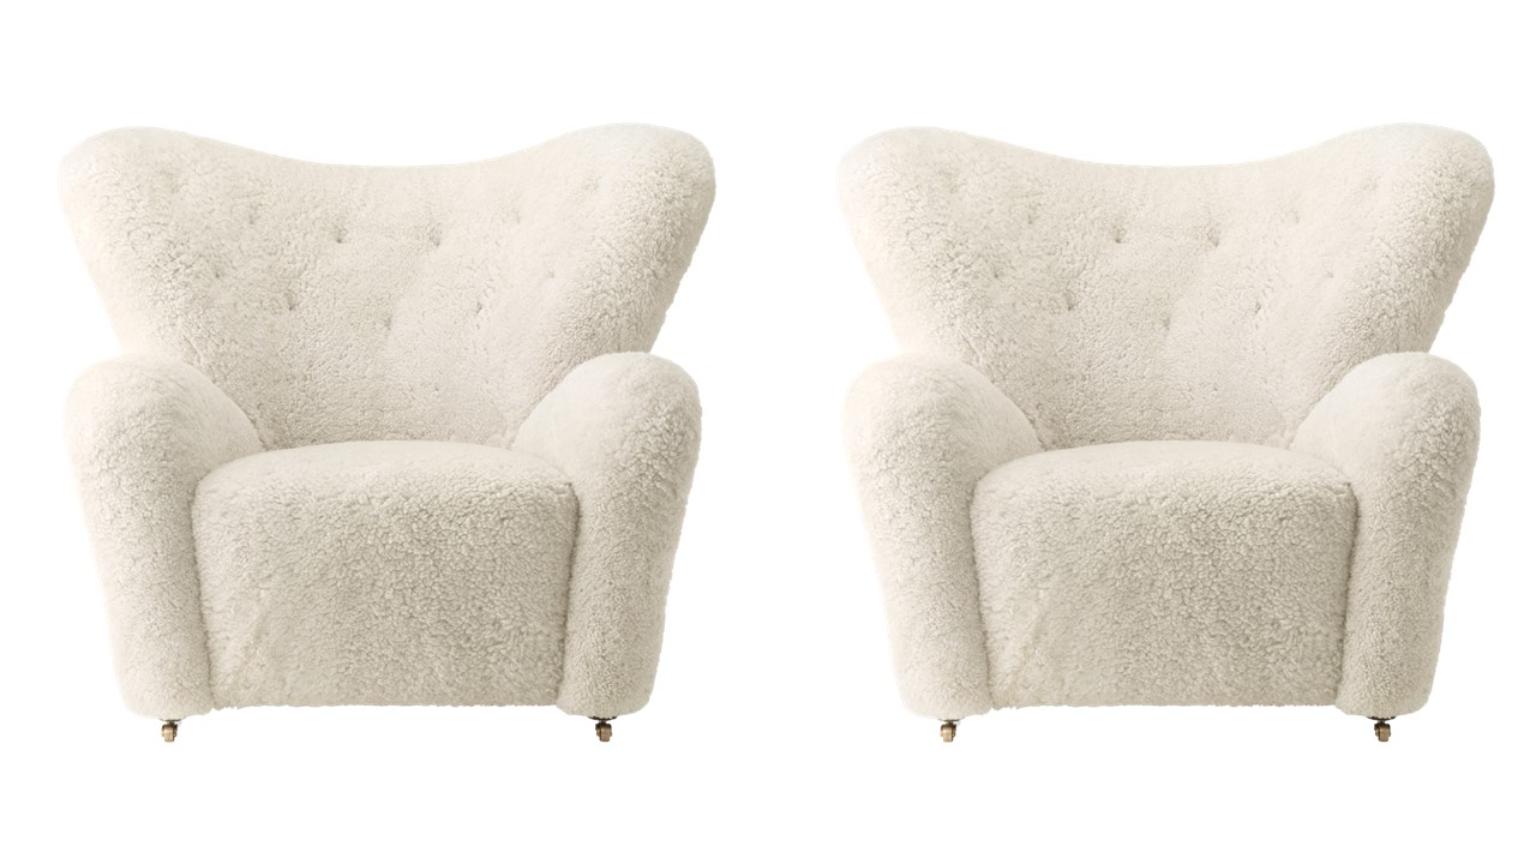 Set of 2 off white Sheepskin the tired man lounge chair by Lassen.
Dimensions: W 102 x D 87 x H 88 cm. 
Materials: Sheepskin.

Flemming Lassen designed the overstuffed easy chair, The Tired Man, for The Copenhagen Cabinetmakers’ Guild